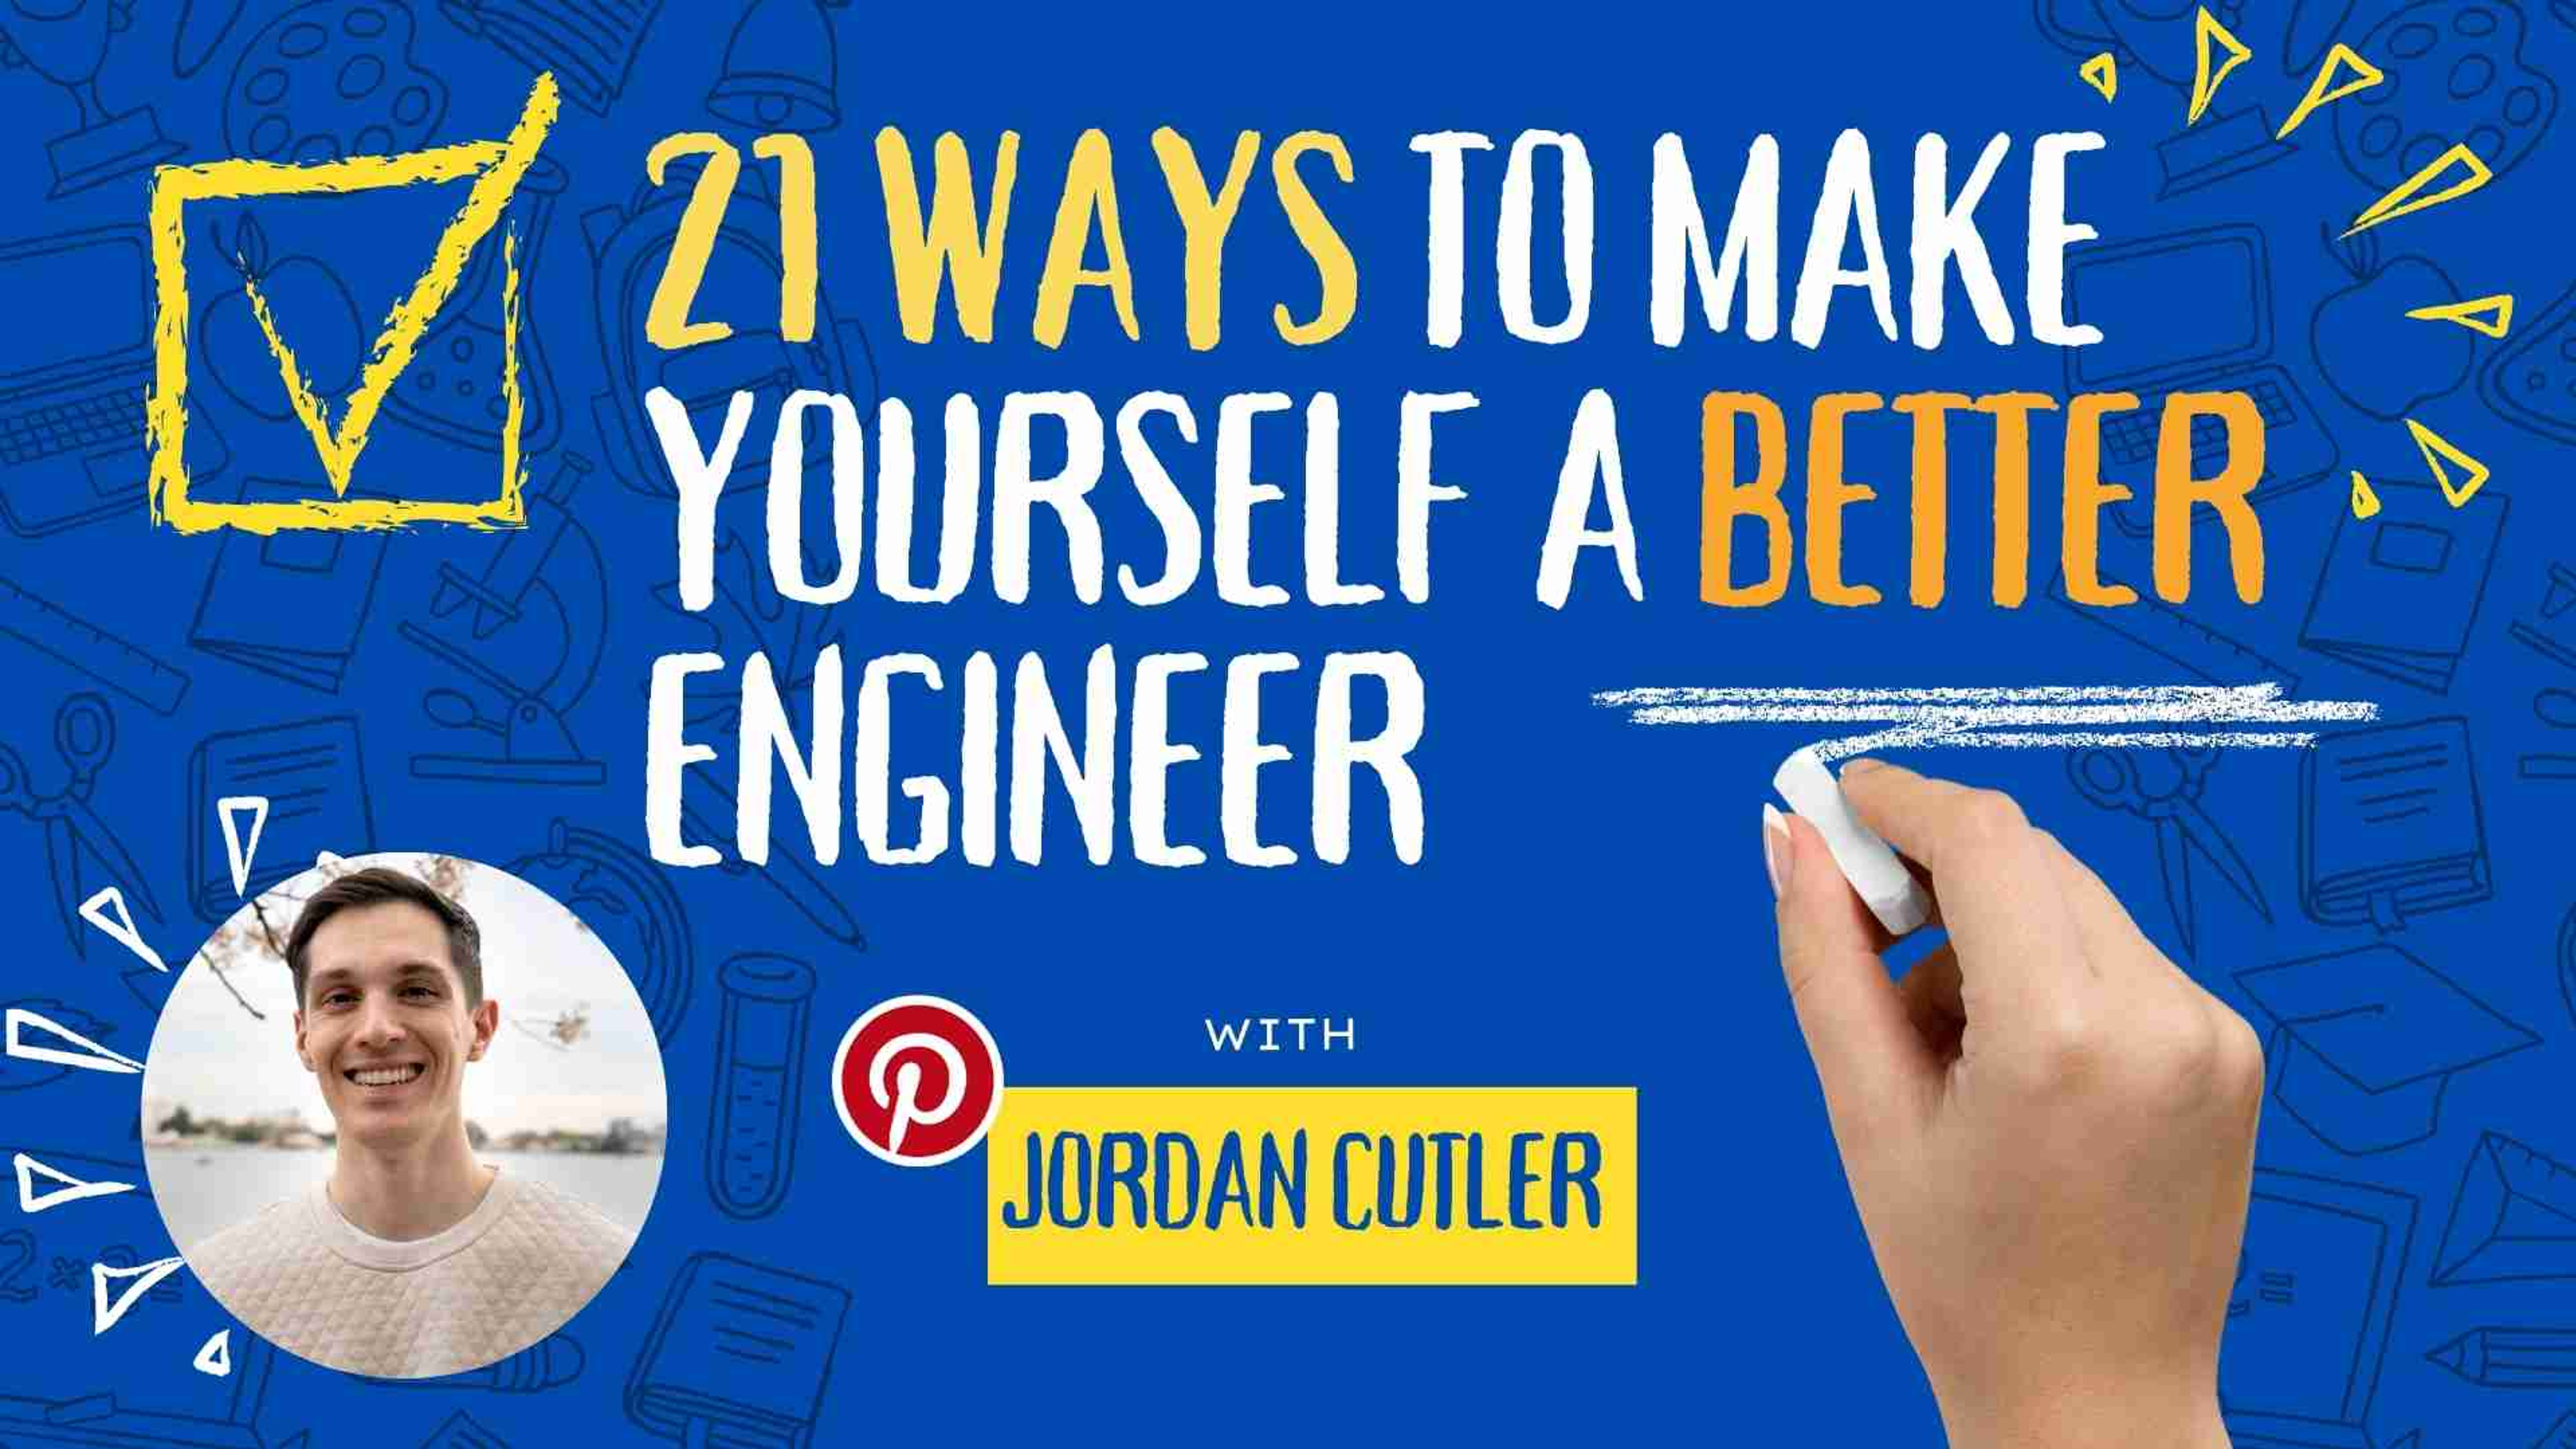 21 Ways to Make Yourself a Better Engineer event